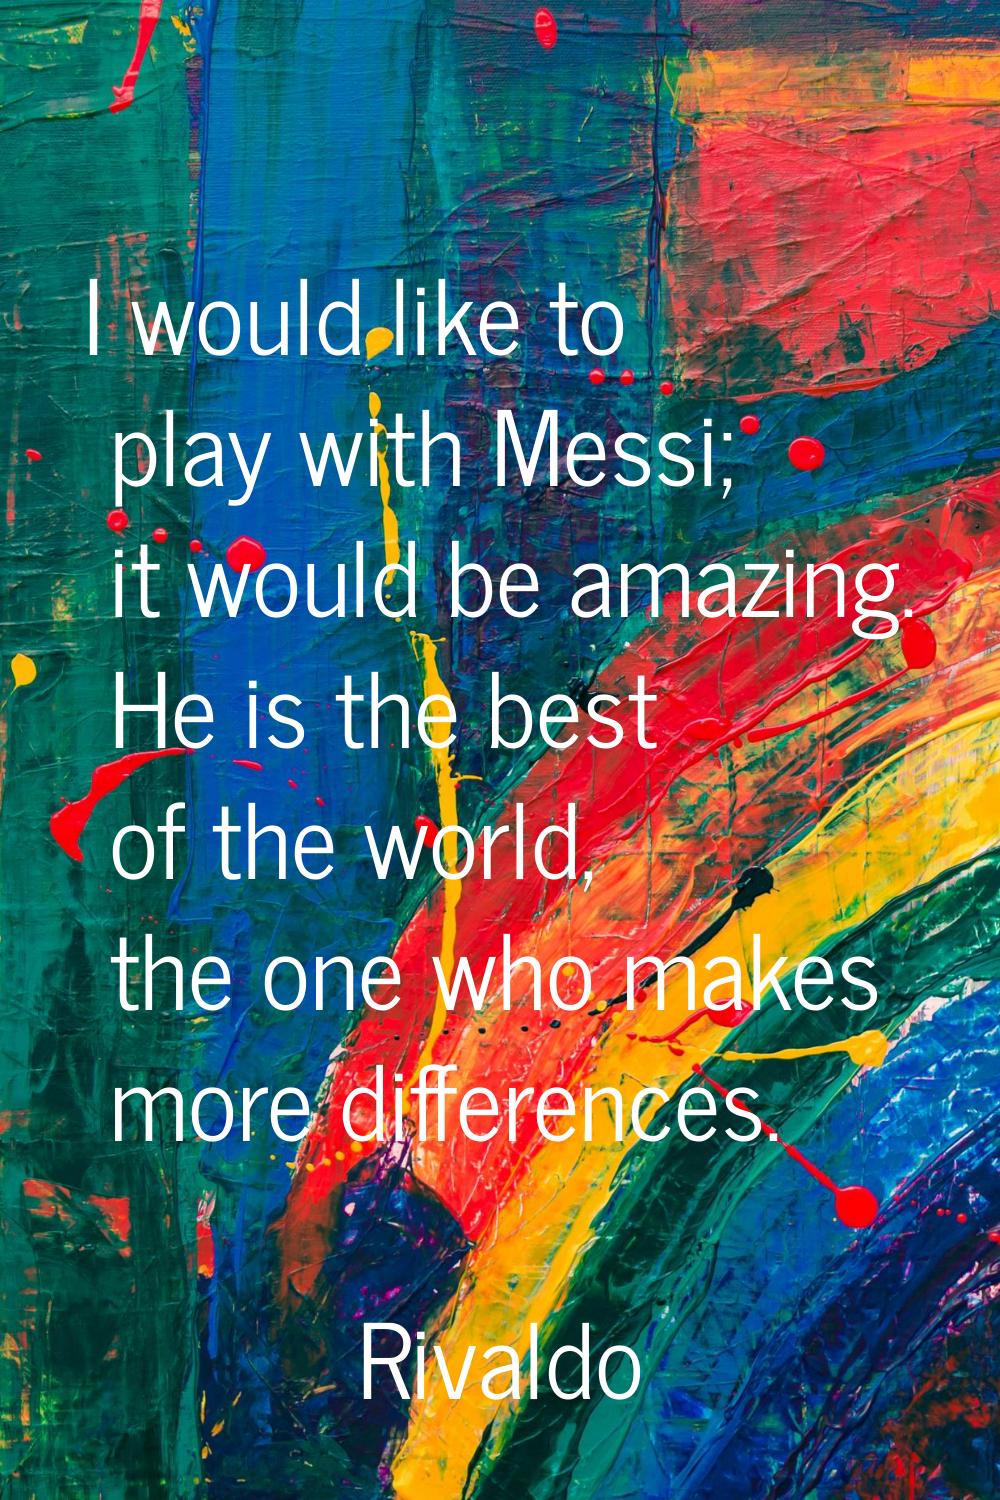 I would like to play with Messi; it would be amazing. He is the best of the world, the one who make